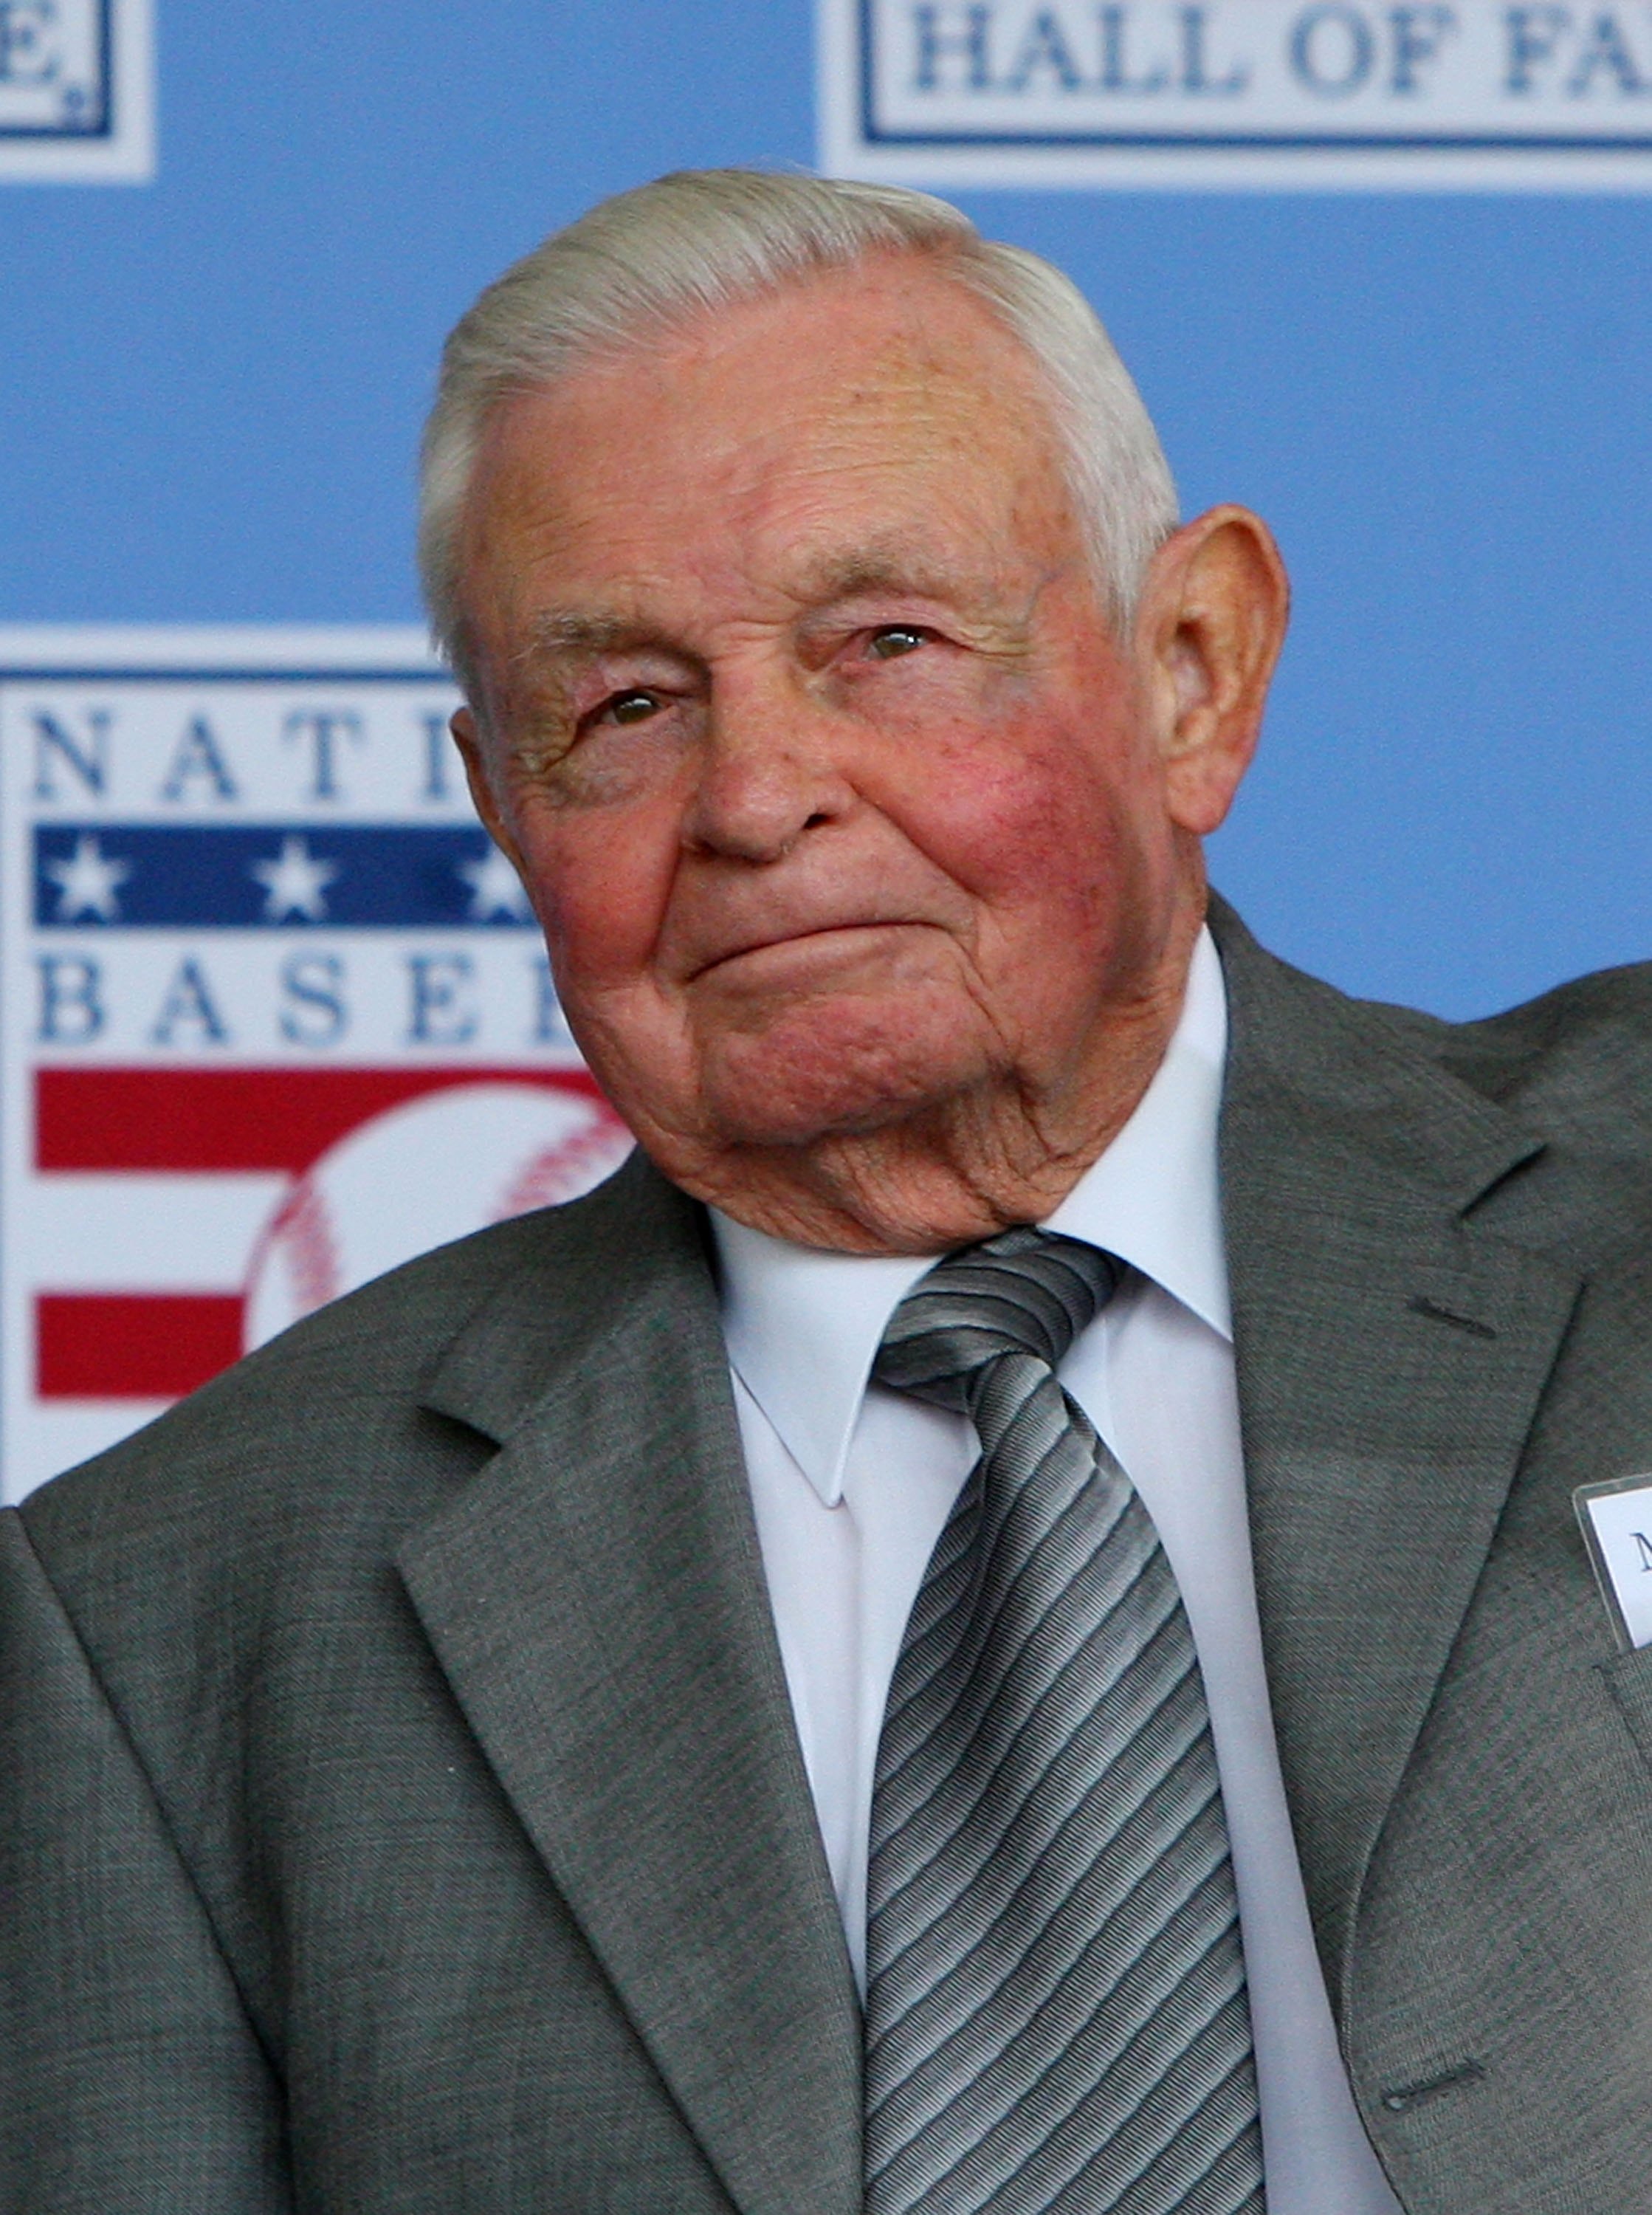 COOPERSTOWN, NY - JULY 26:  Hall of Fame manager Earl Weaver looks on at Clark Sports Center during the 2009  Baseball Hall of Fame induction ceremony on July 26, 2009 in Cooperstown, New York.  (Photo by Jim McIsaac/Getty Images)